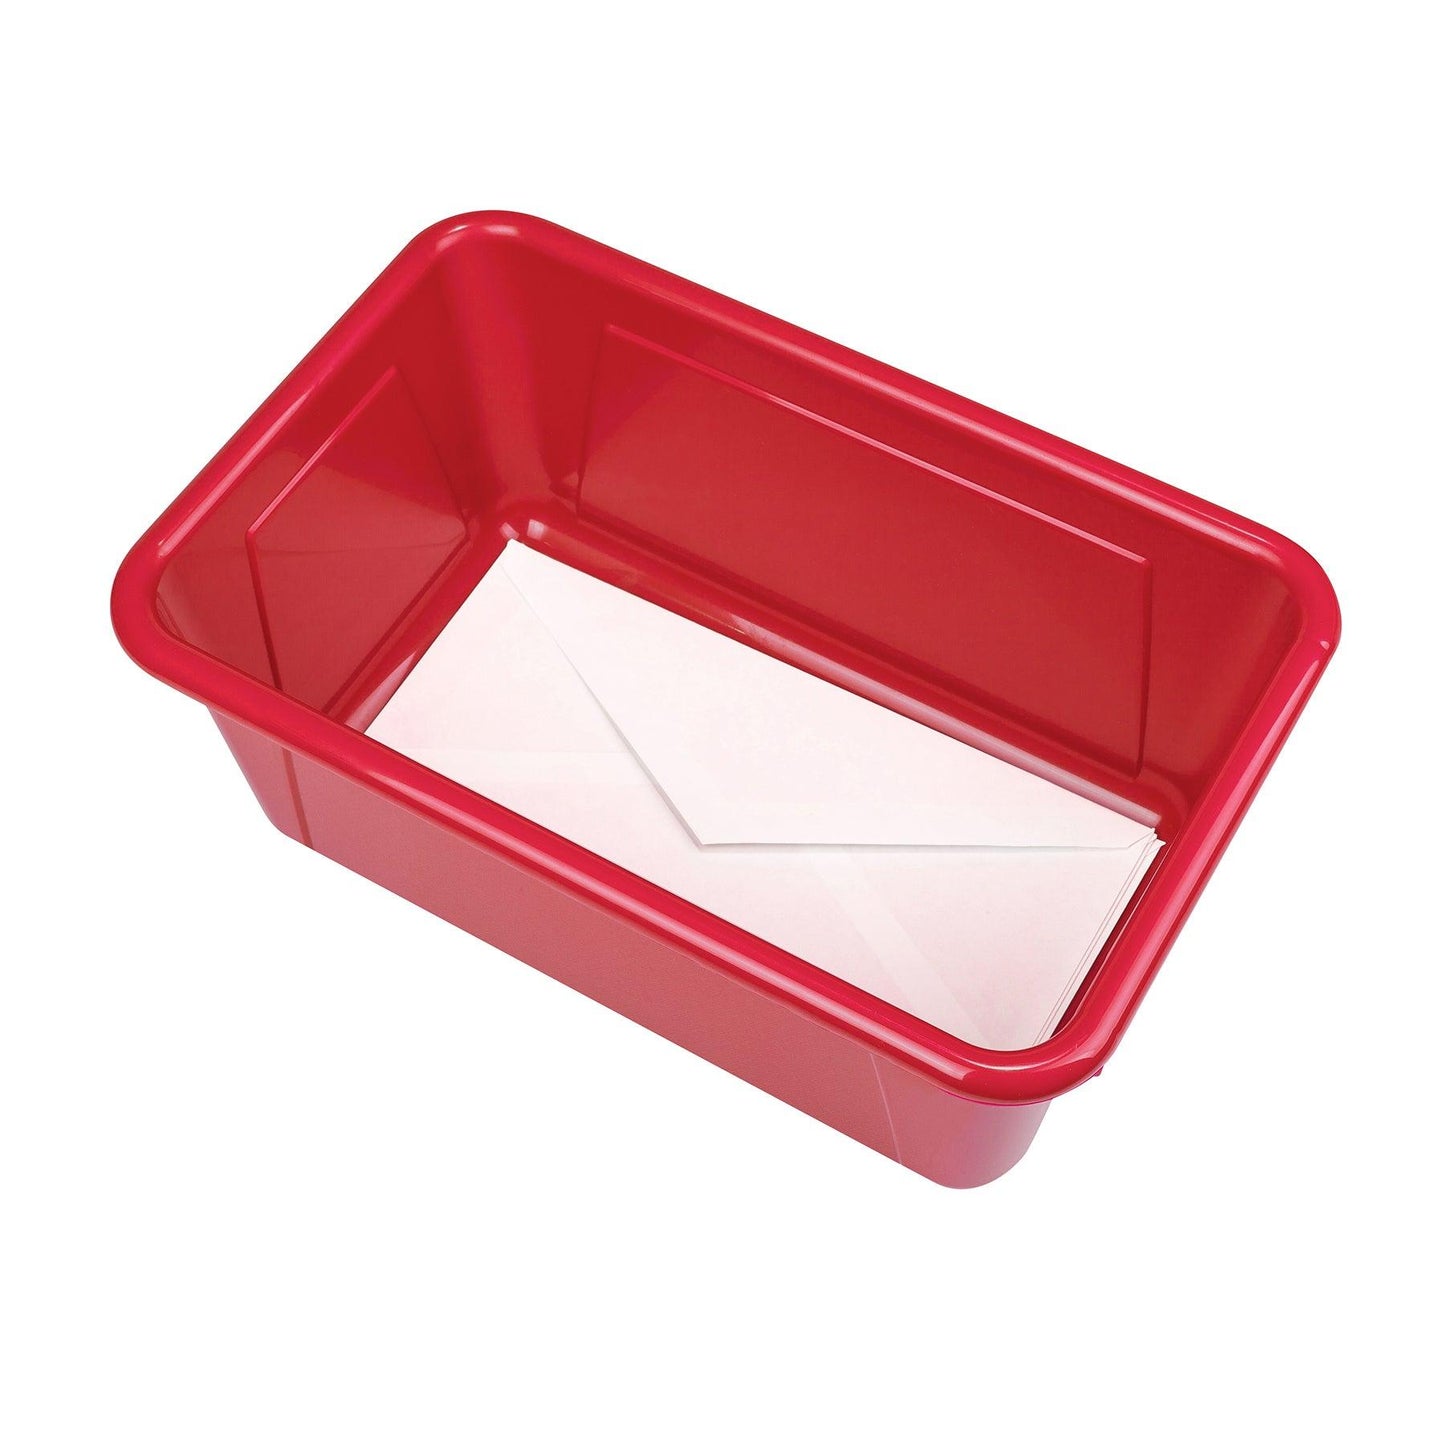 Small Cubby Bin, Red, Pack of 5 - Loomini